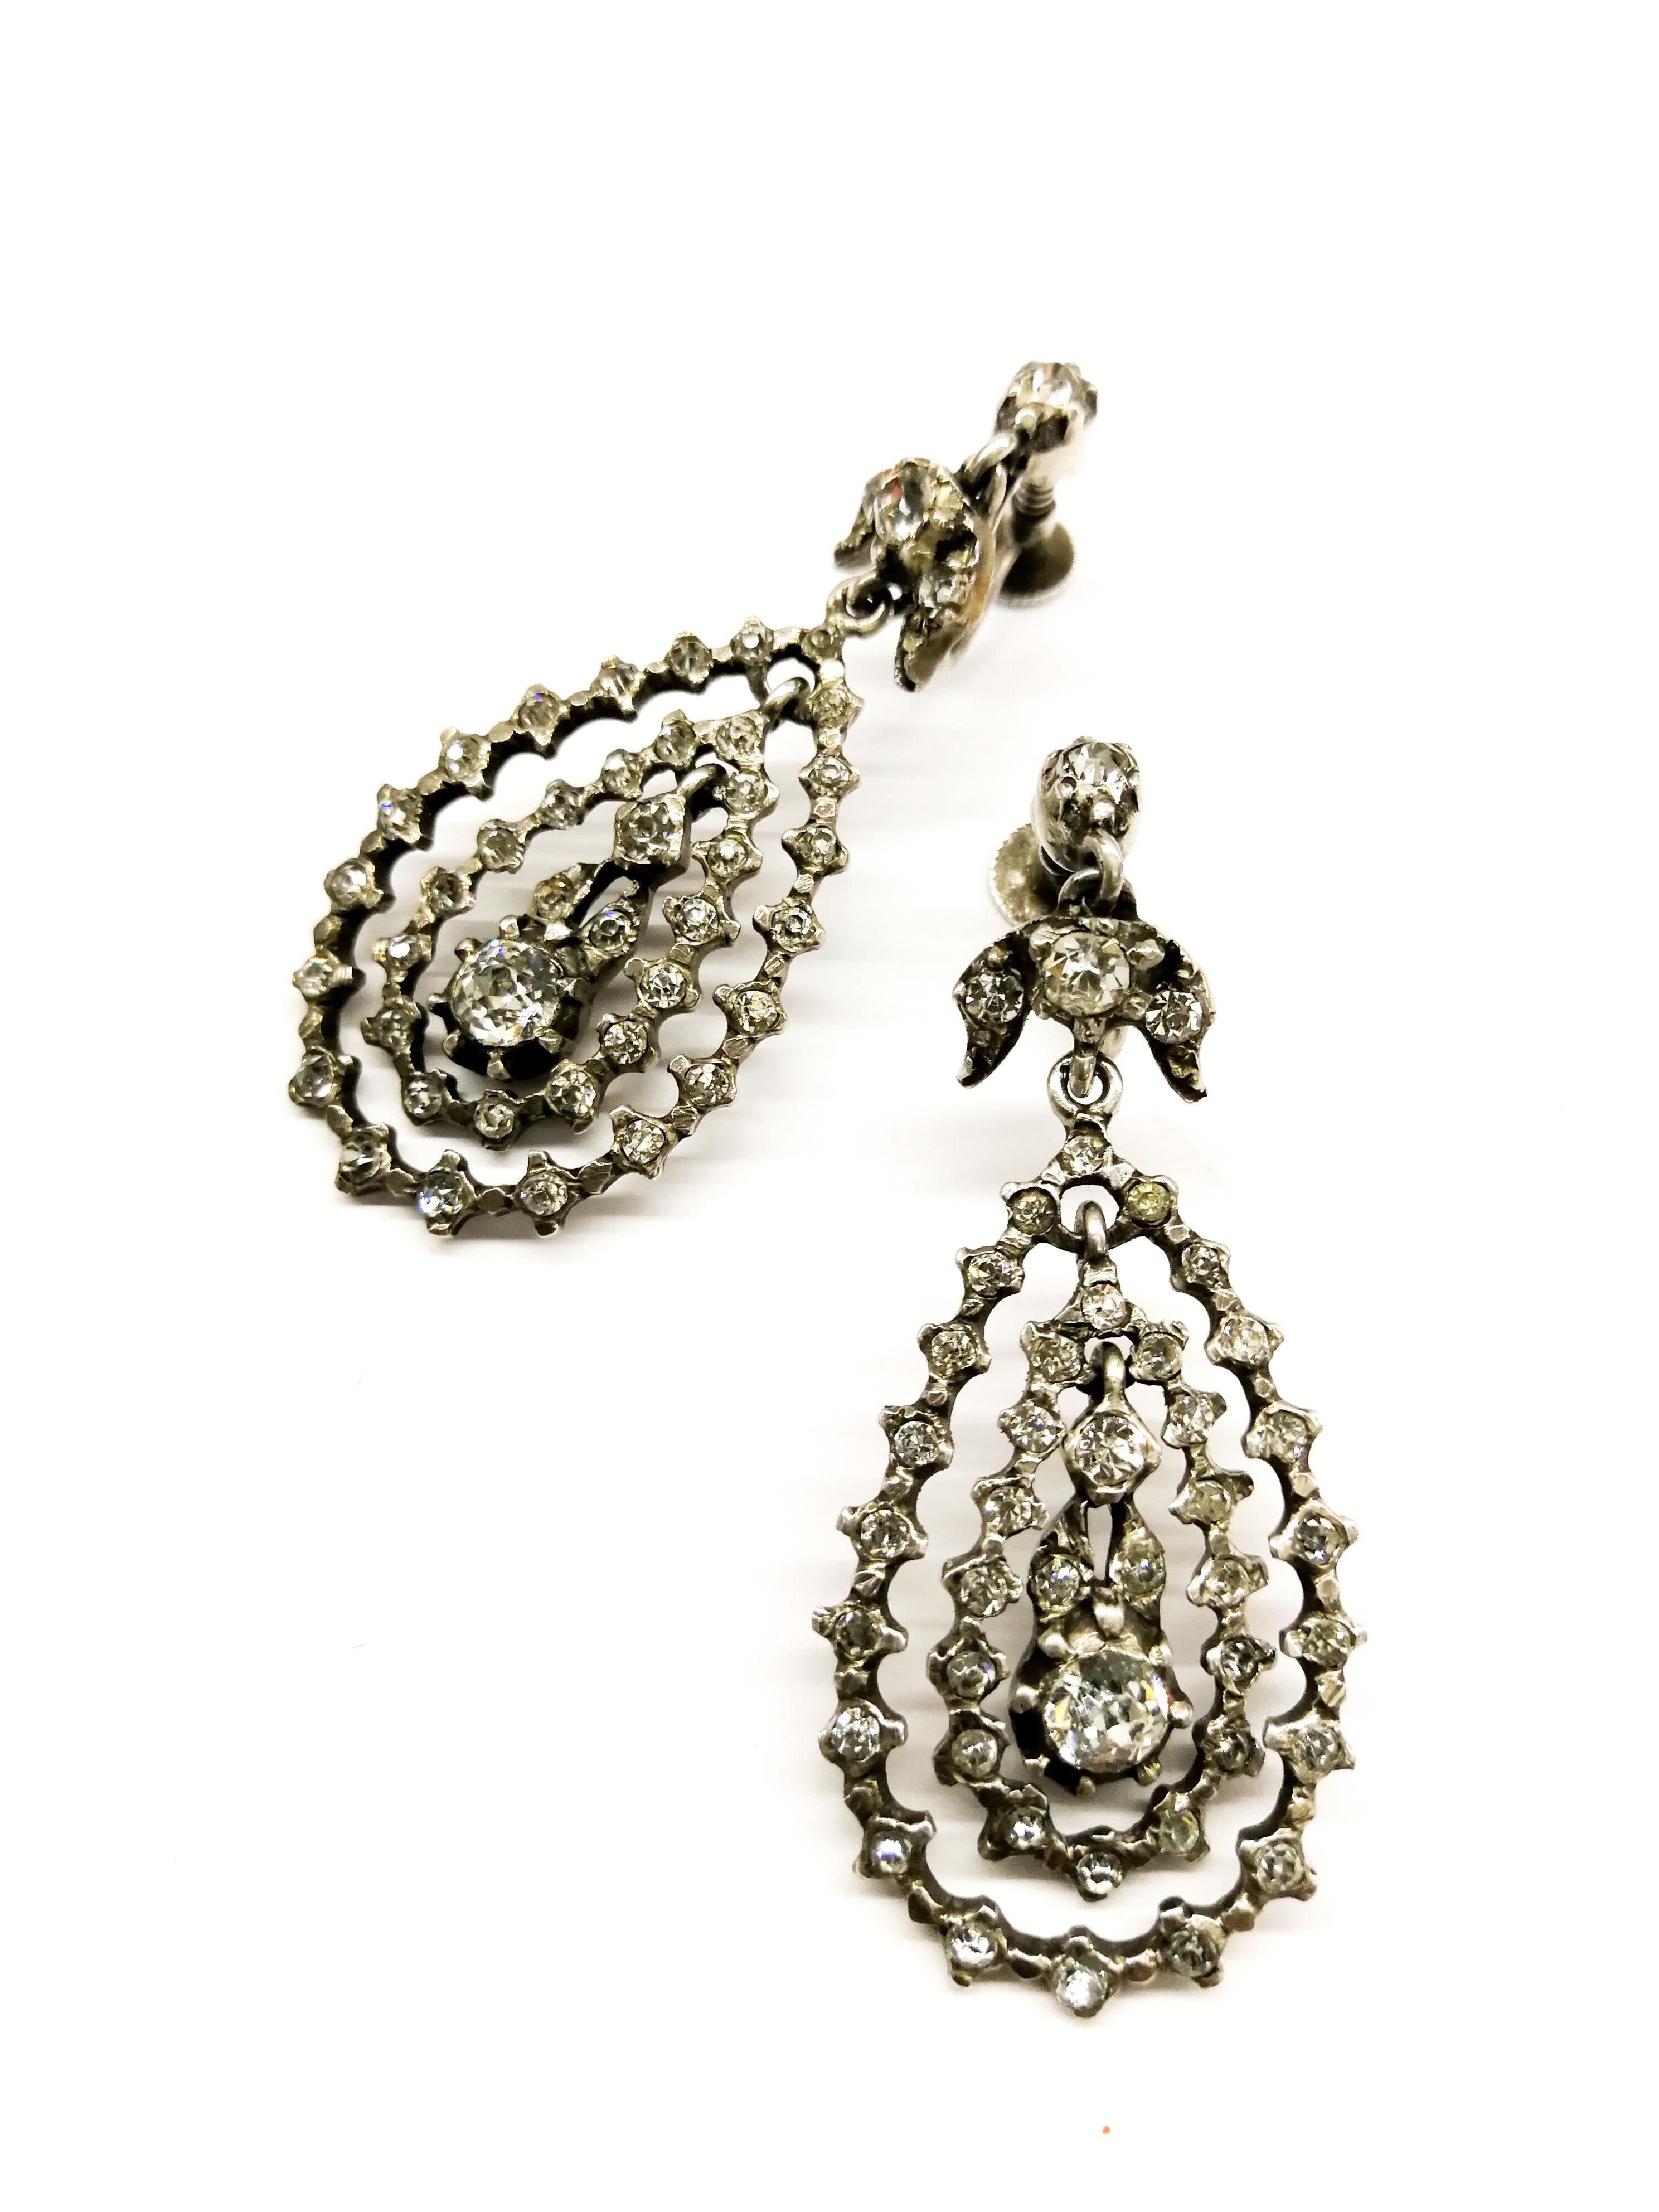 Edwardian A pair of articulated multi hoop silver and paste drop earrings, French, c1900s